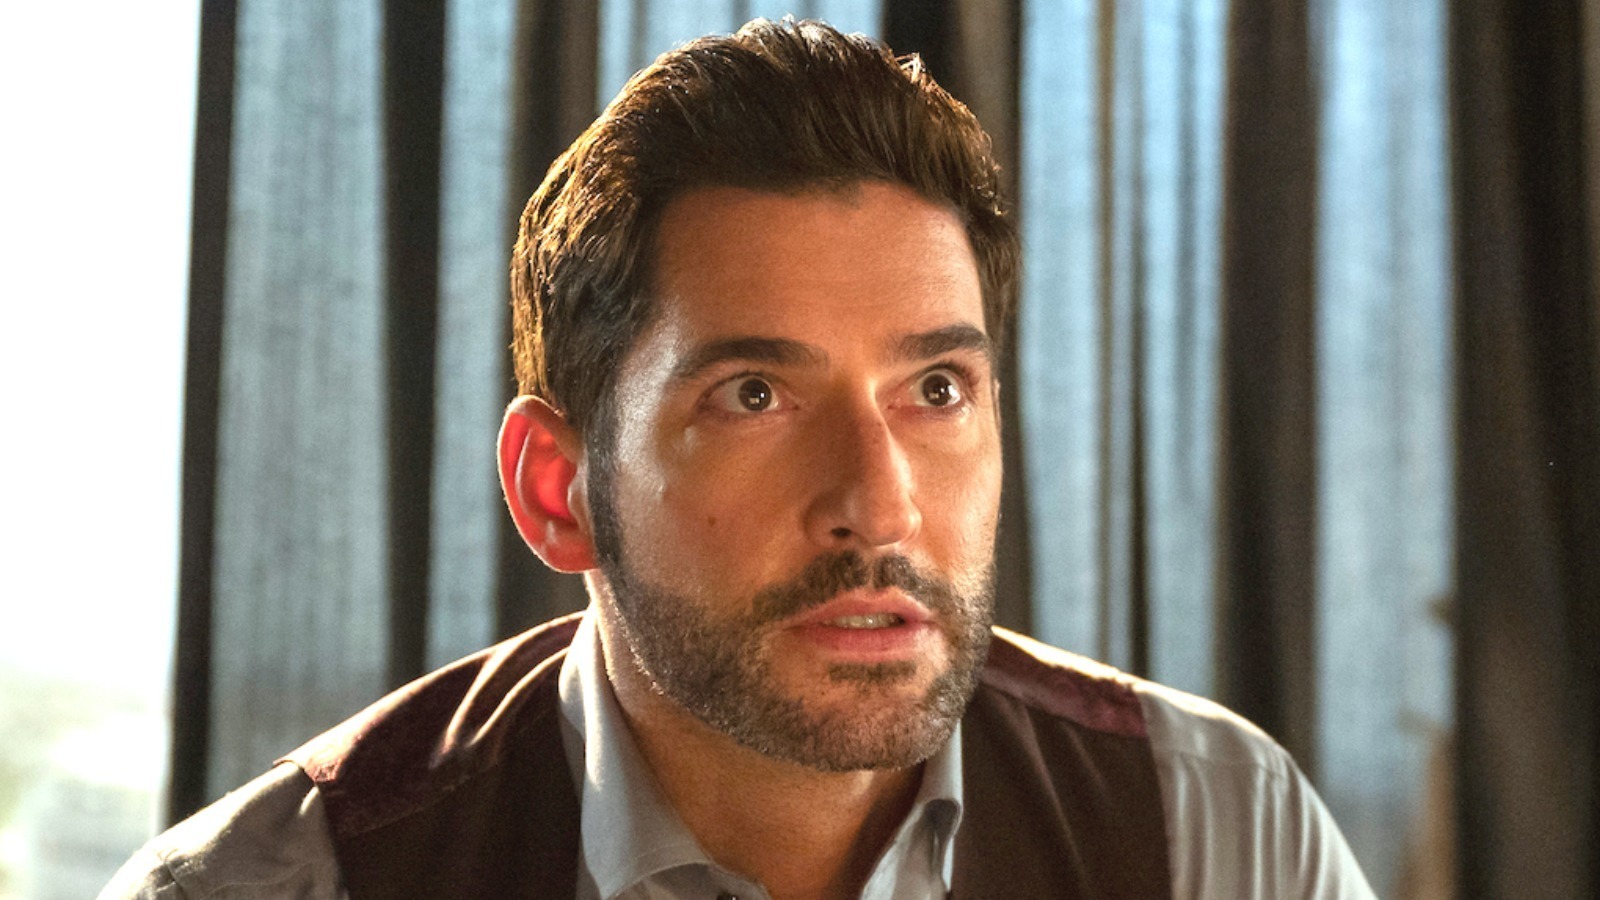 These First Look Lucifer Season 6 Photo Are Extremely Revealing